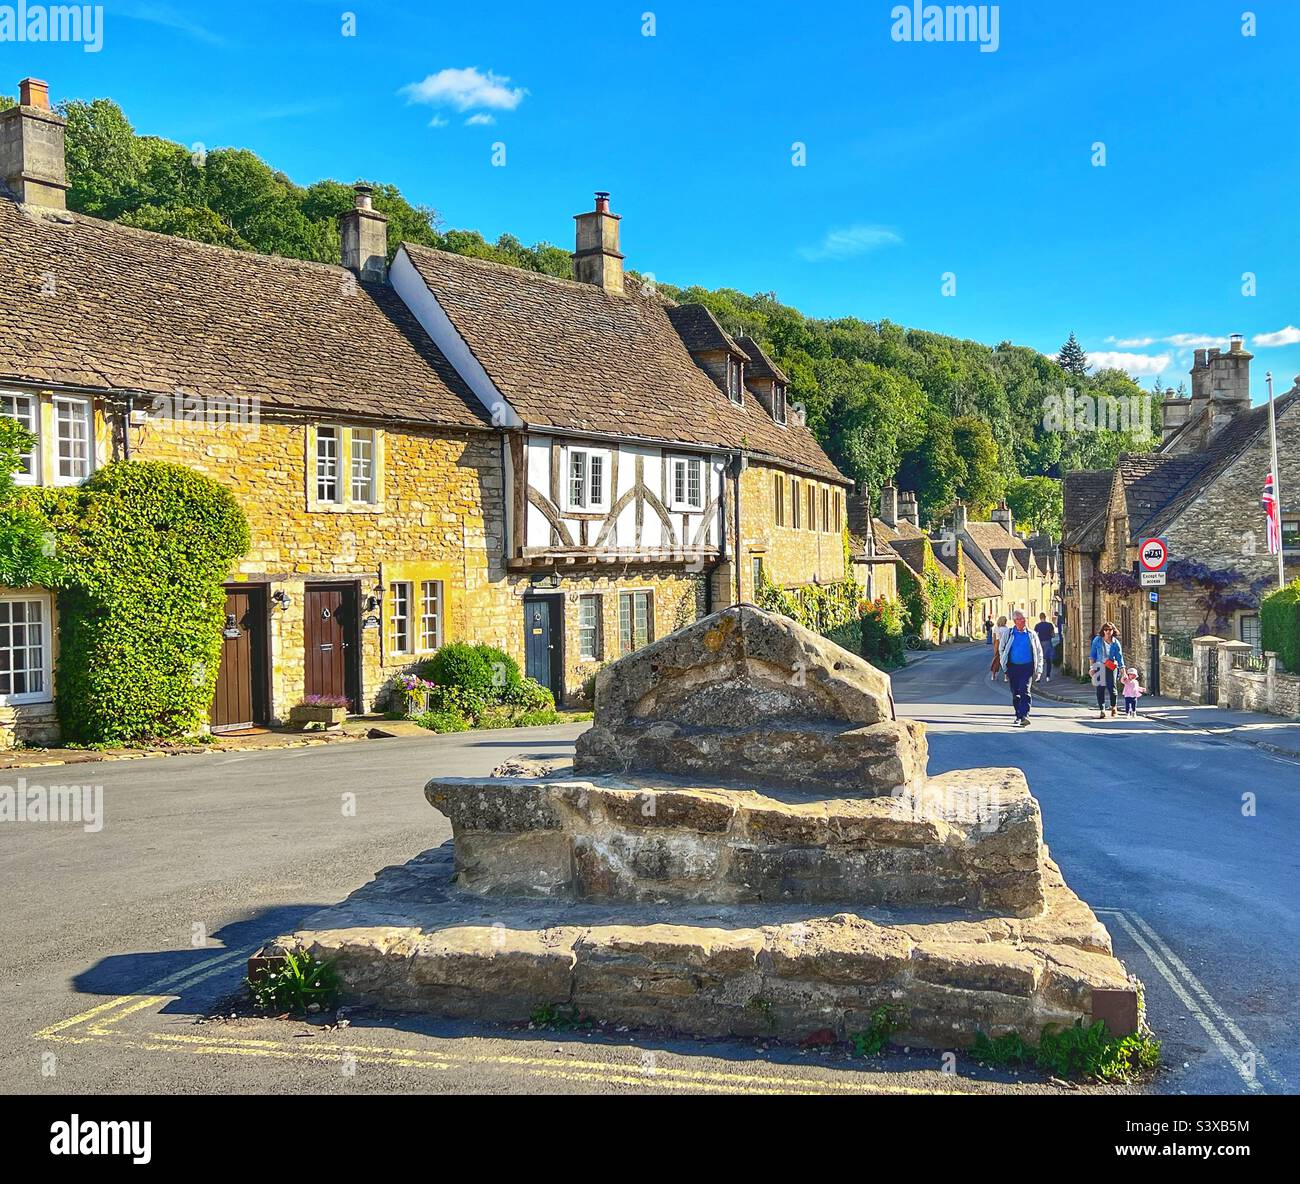 Centre of The Village of Castle Combe in the Cotswolds, Wiltshire looking down the street past the stone steps Stock Photo